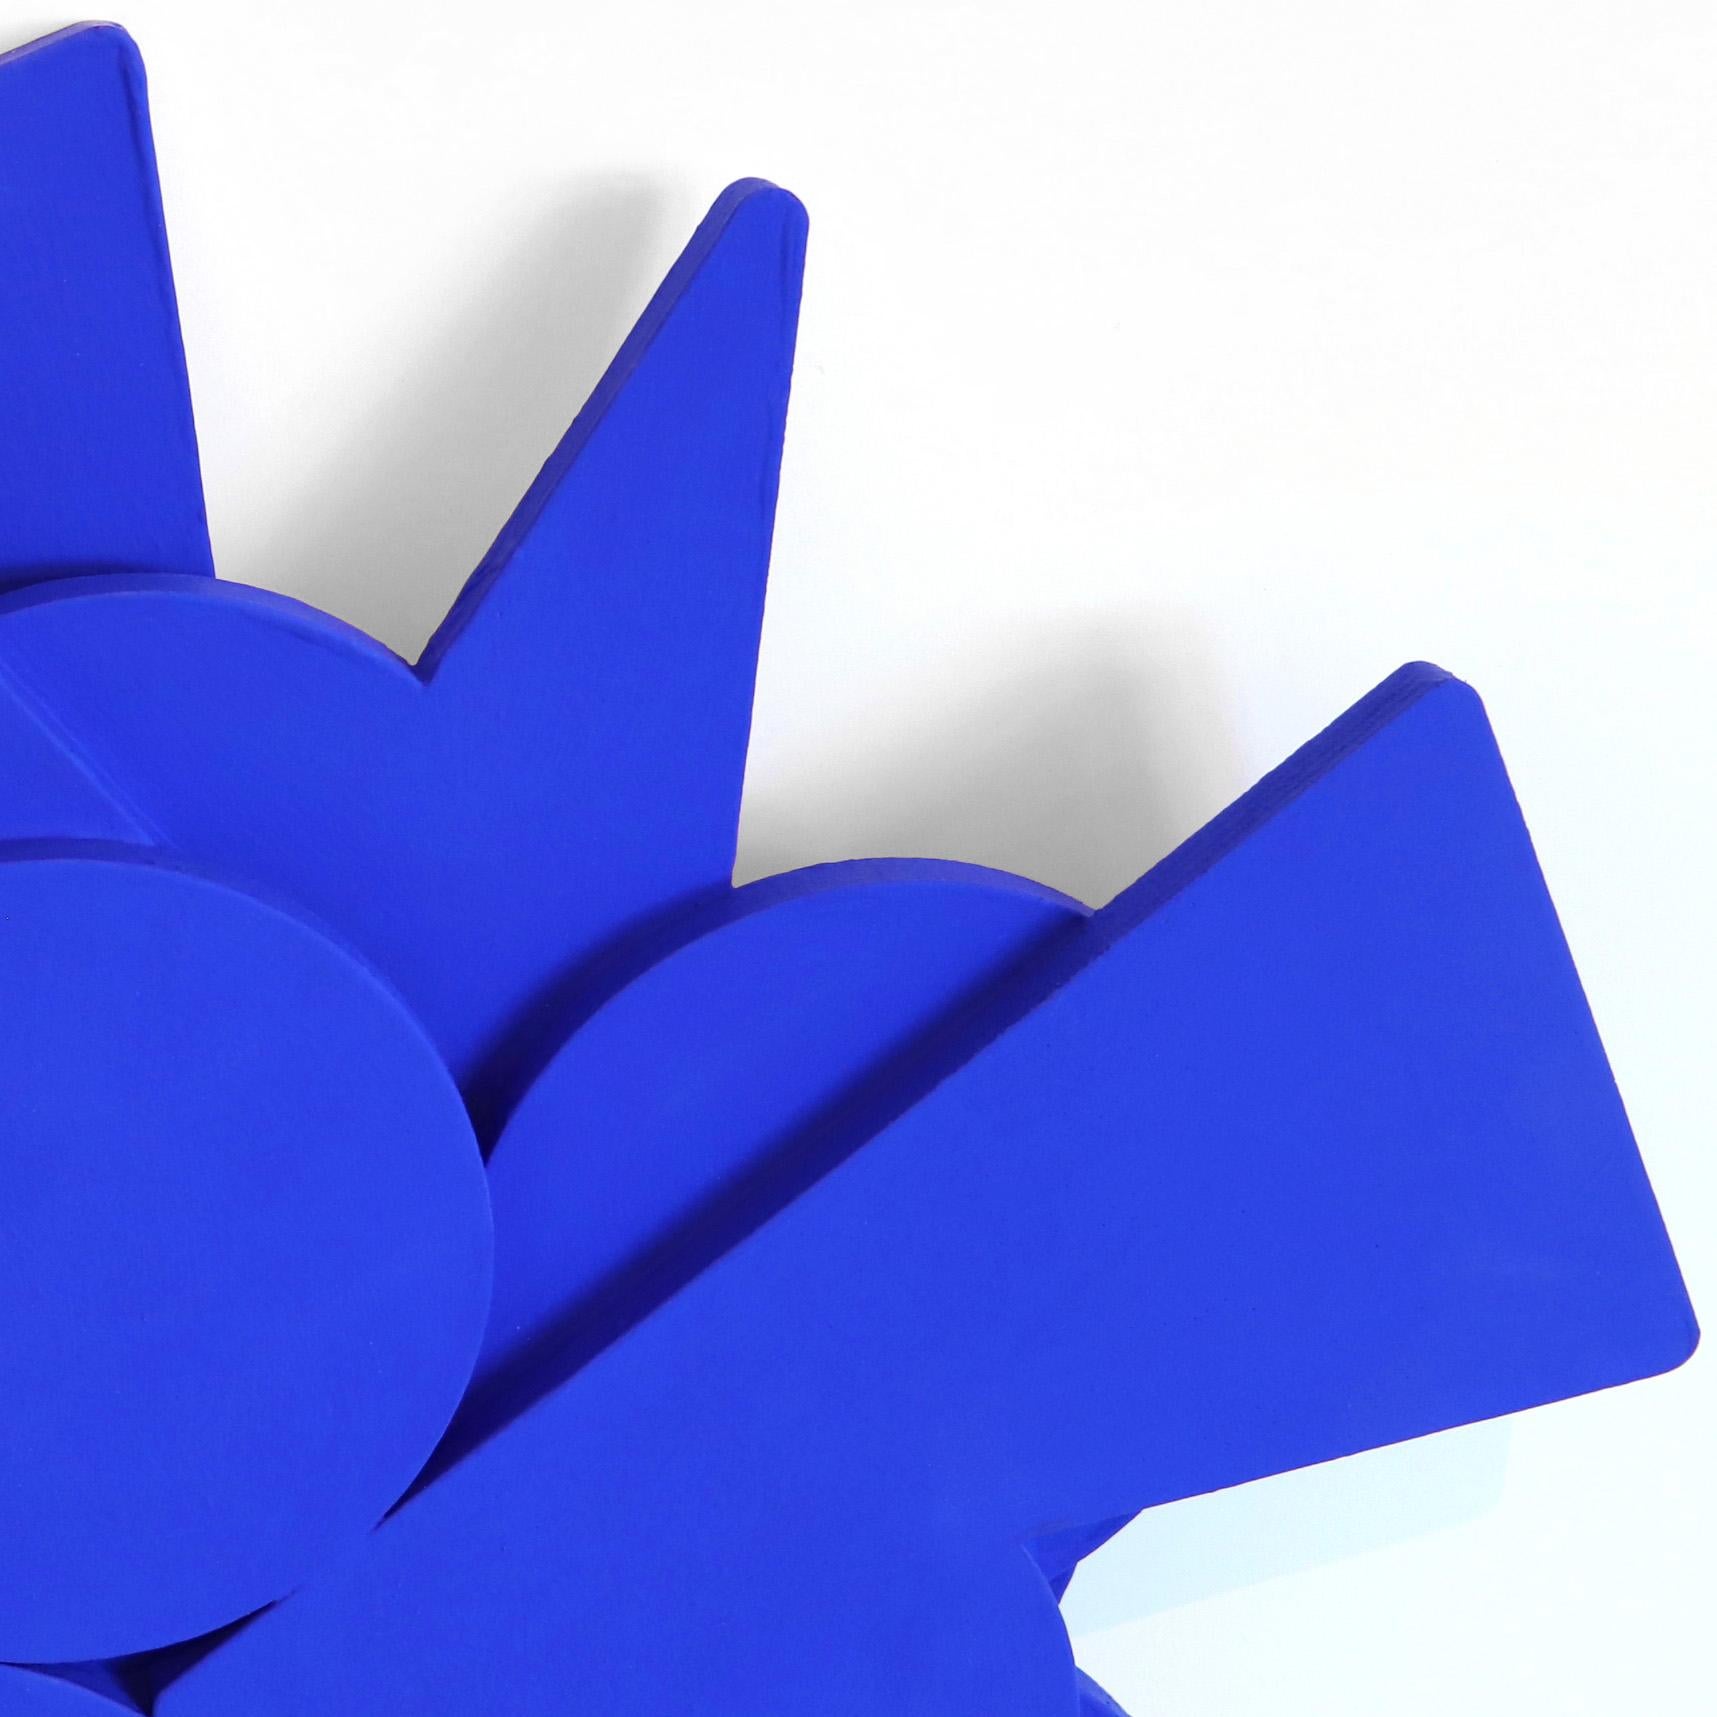 Azul - Minimalist Sculpture by Billy Criswell